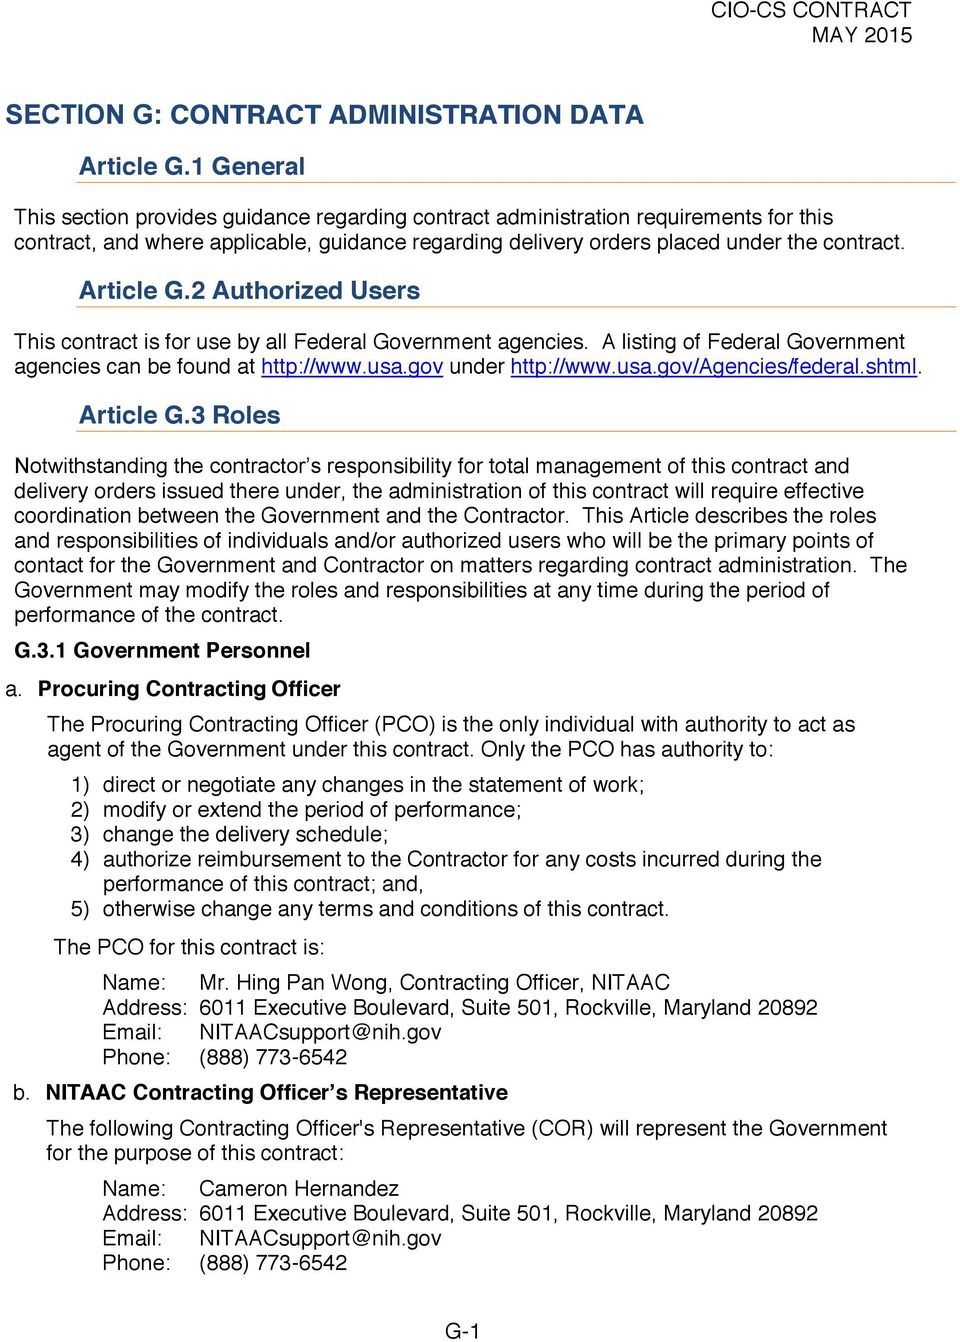 Article G.2 Authorized Users This contract is for use by all Federal Government agencies. A listing of Federal Government agencies can be found at http://www.usa.gov under http://www.usa.gov/agencies/federal.